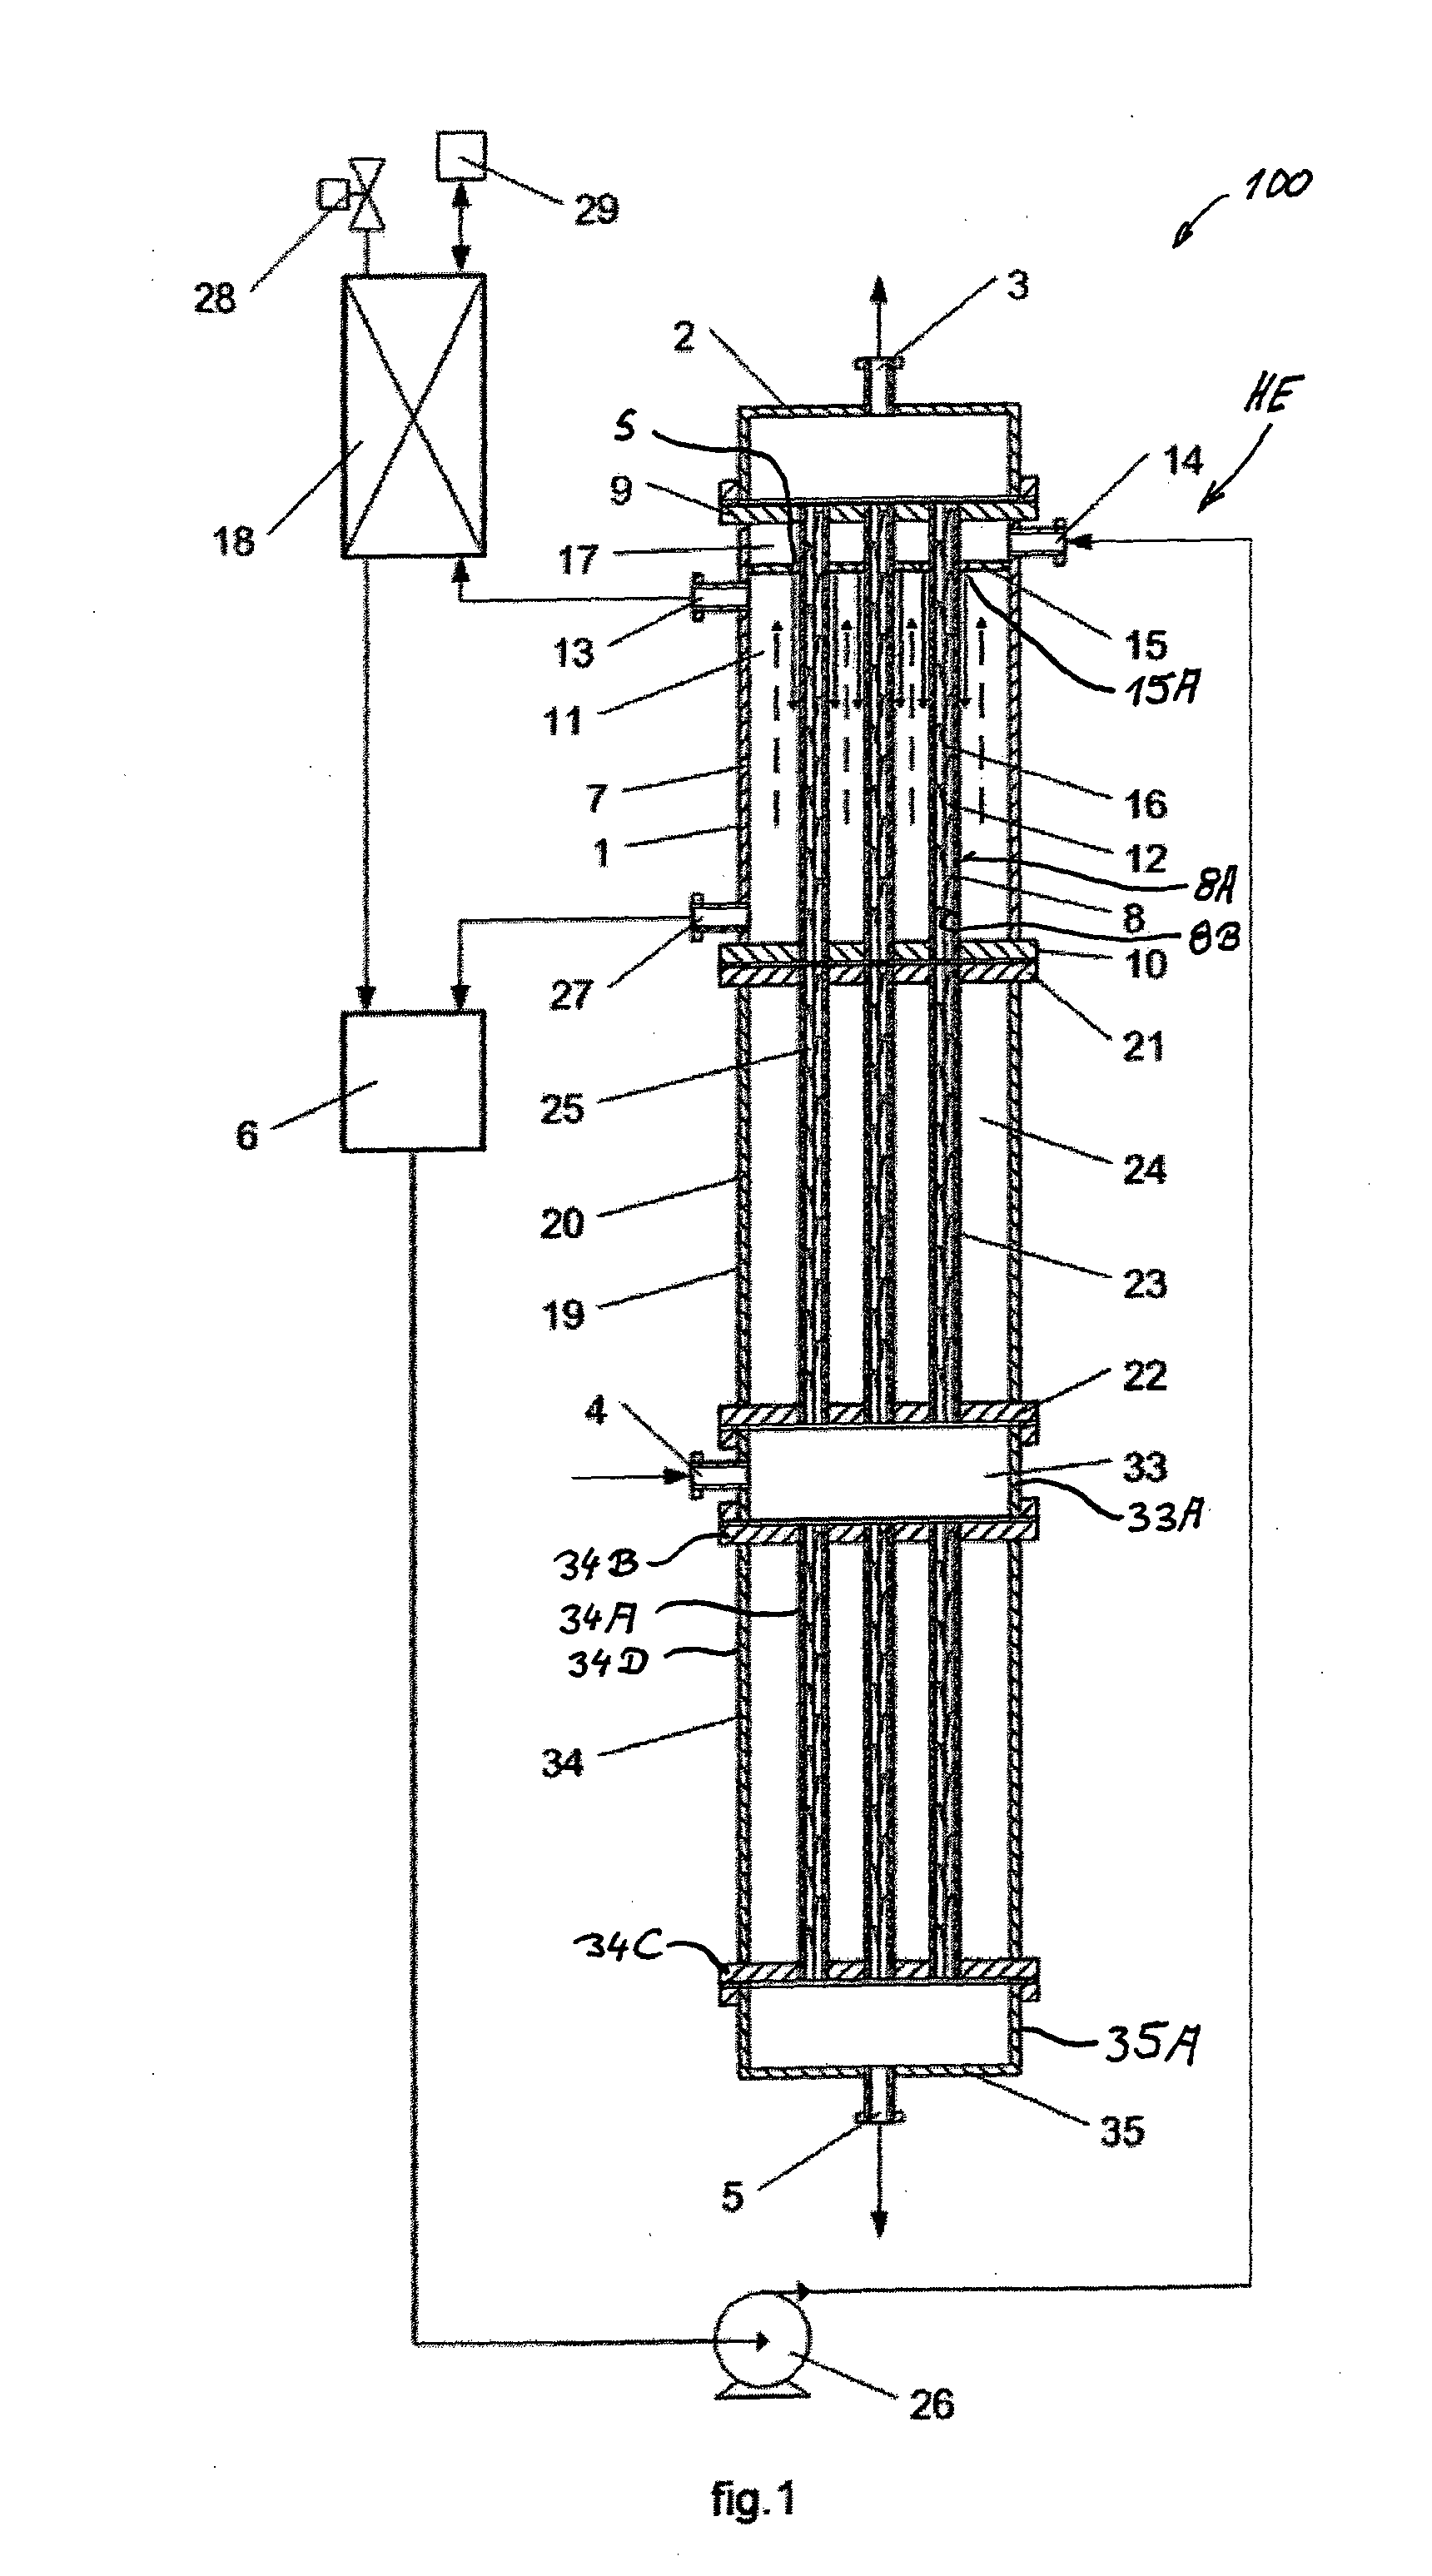 Rectification Tower with Internal Heat and Mass Exchange and Method for Separation of Multi-Component Mixtures into Fractions Using a Rectification Tower with an Internal Heat and Mass Exchange